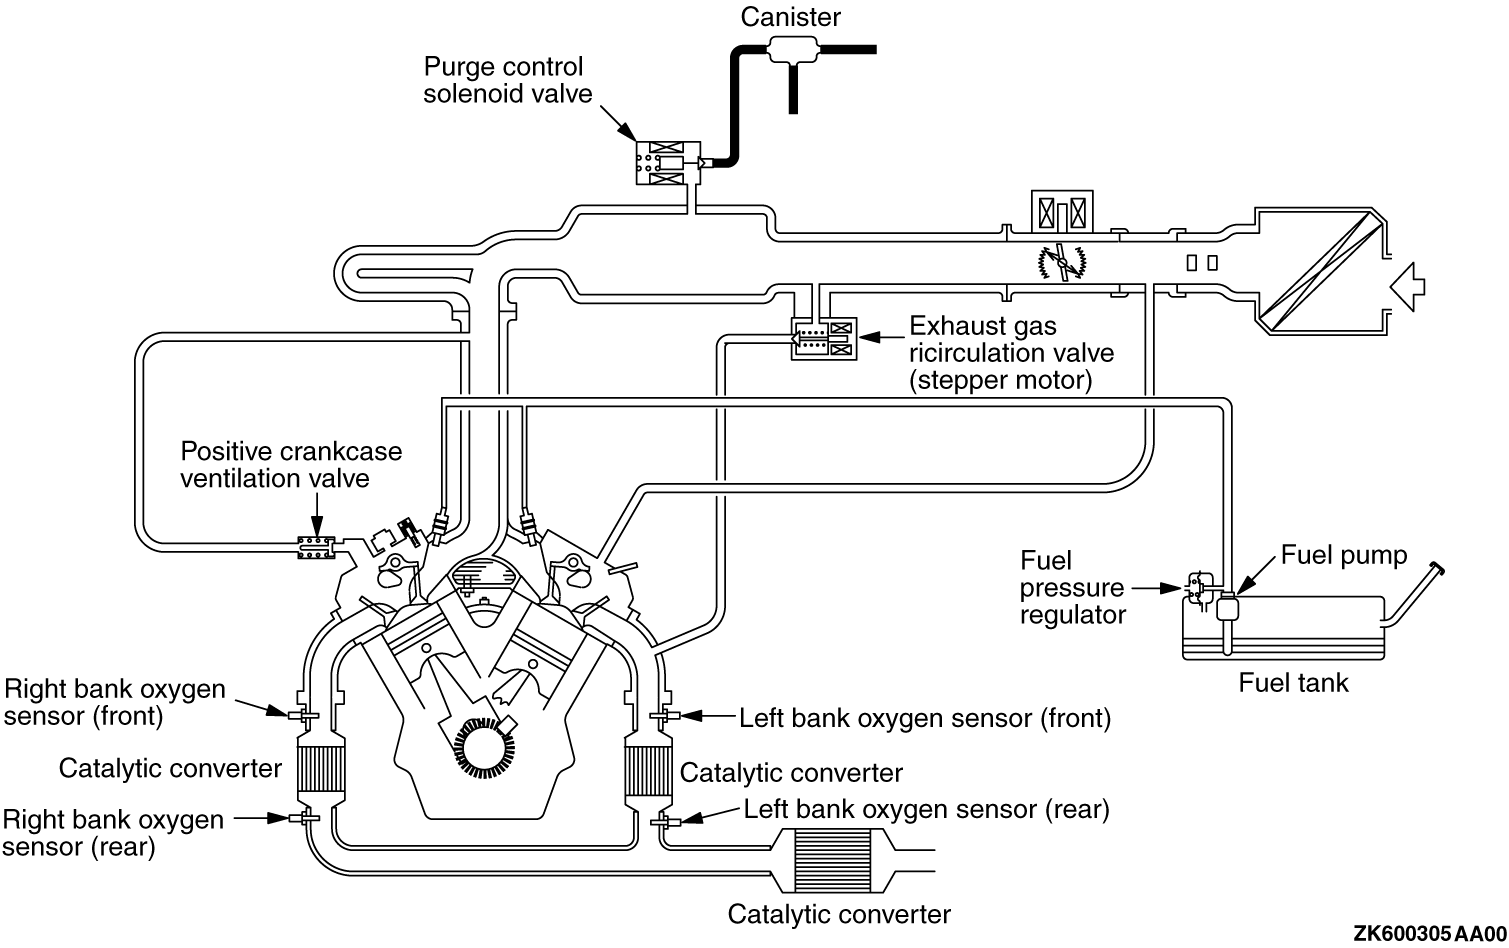 What is an emission control system?